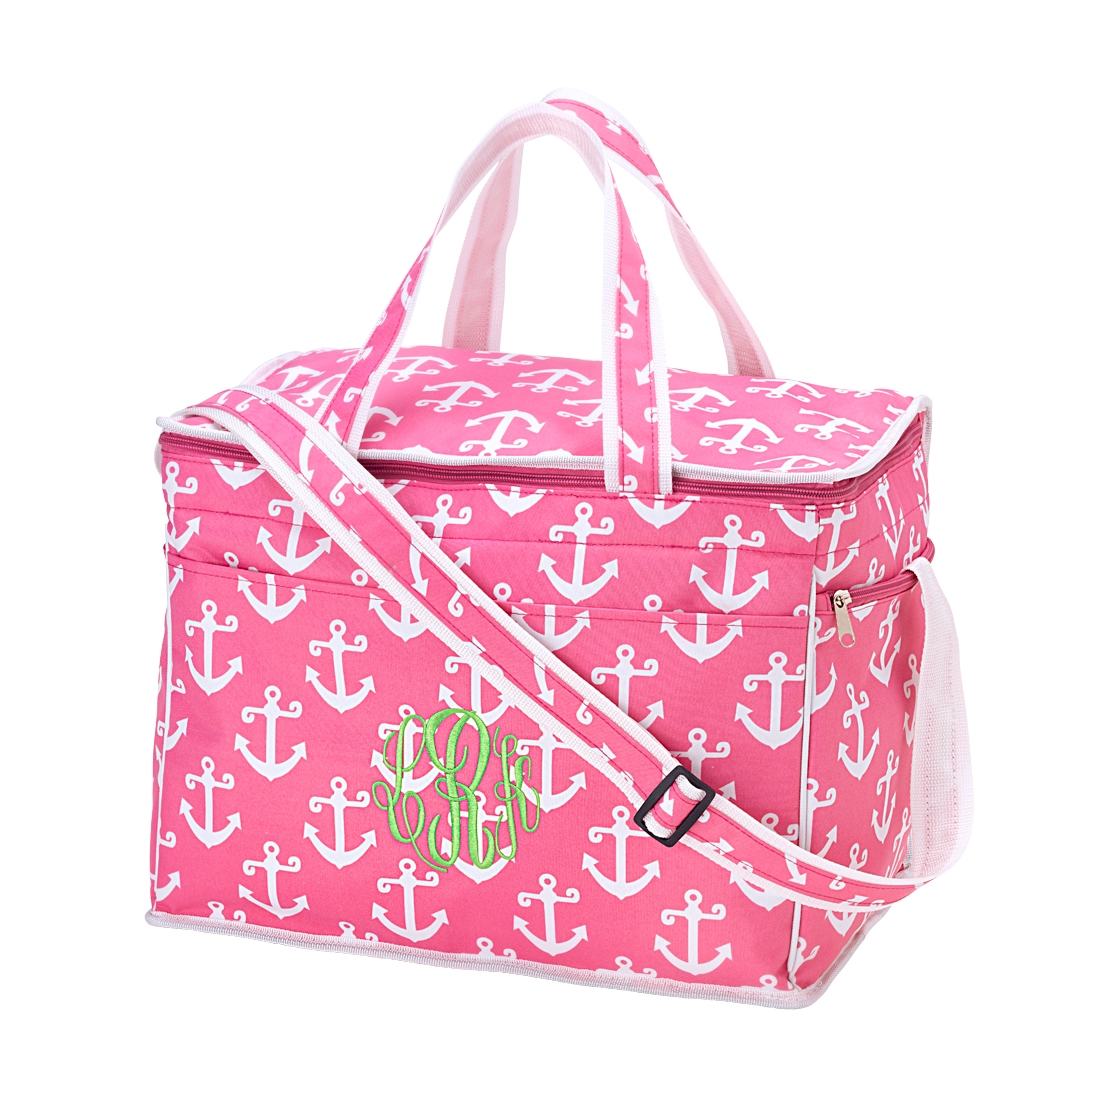 Cooler Embroidery Blanks - Pink/White Anchor CLOSEOUT